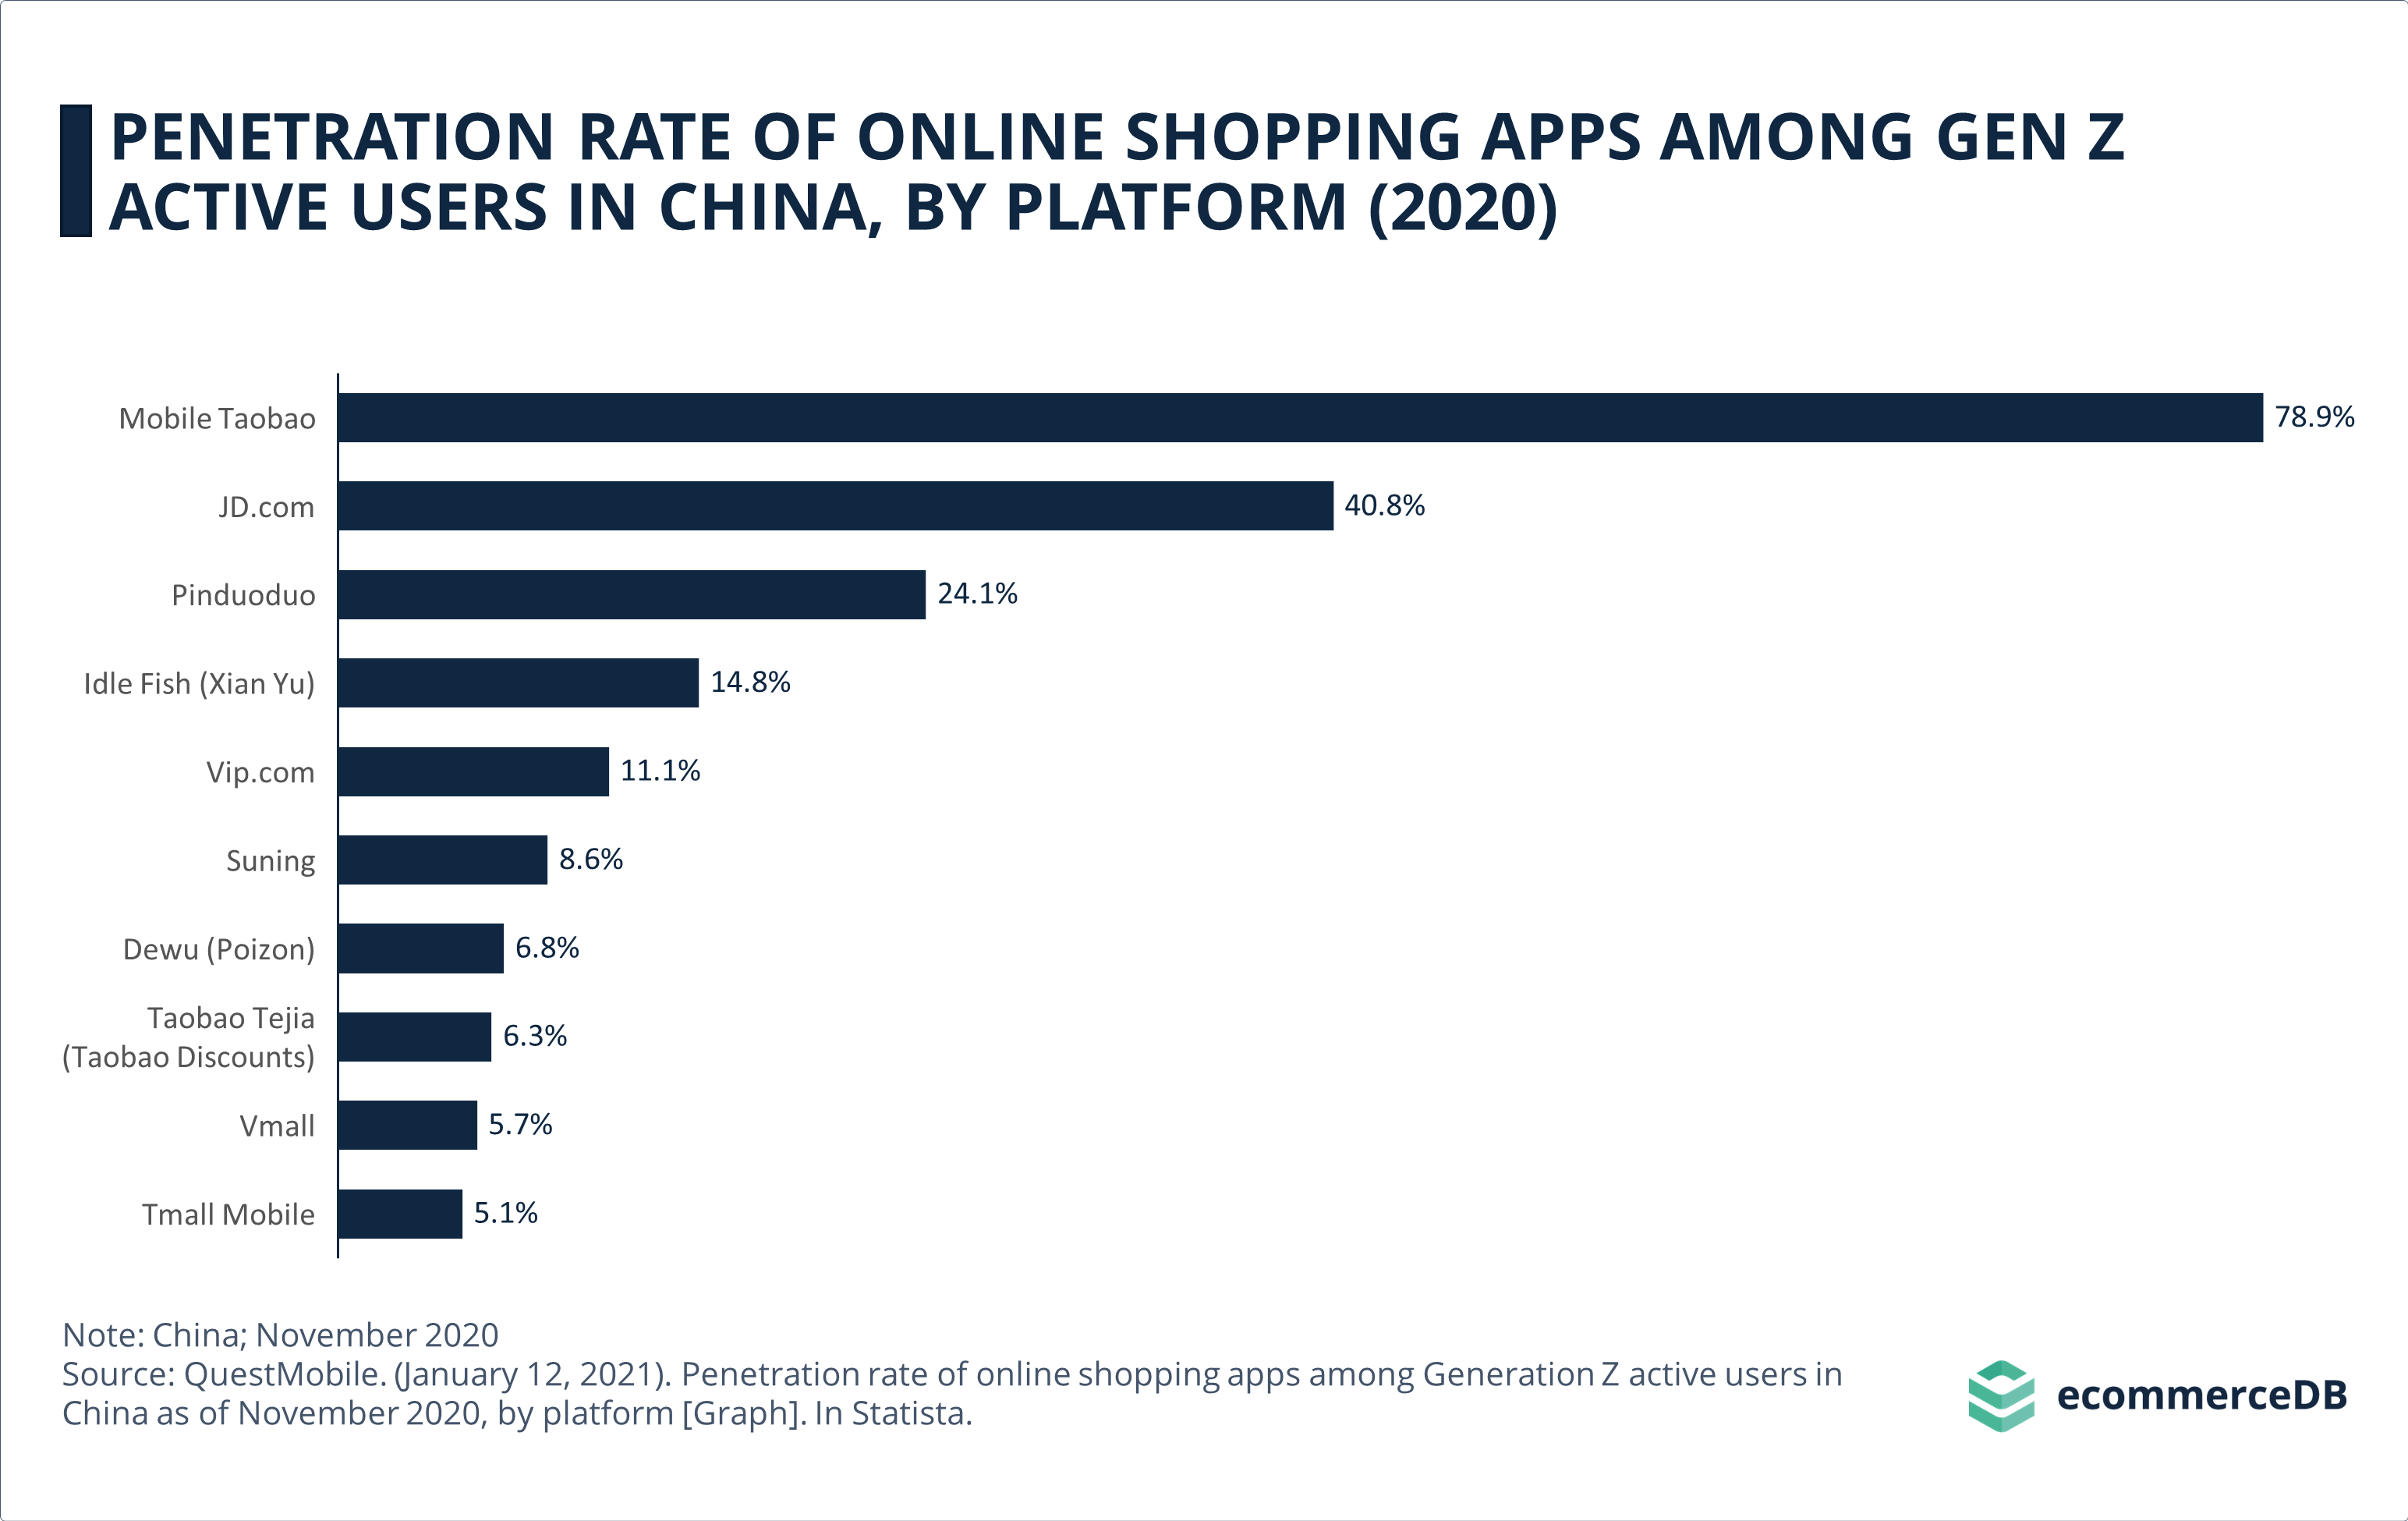 Penetration Rate of Online Shopping Apps Among Gen Z Active Users in China, by Platform (2020)